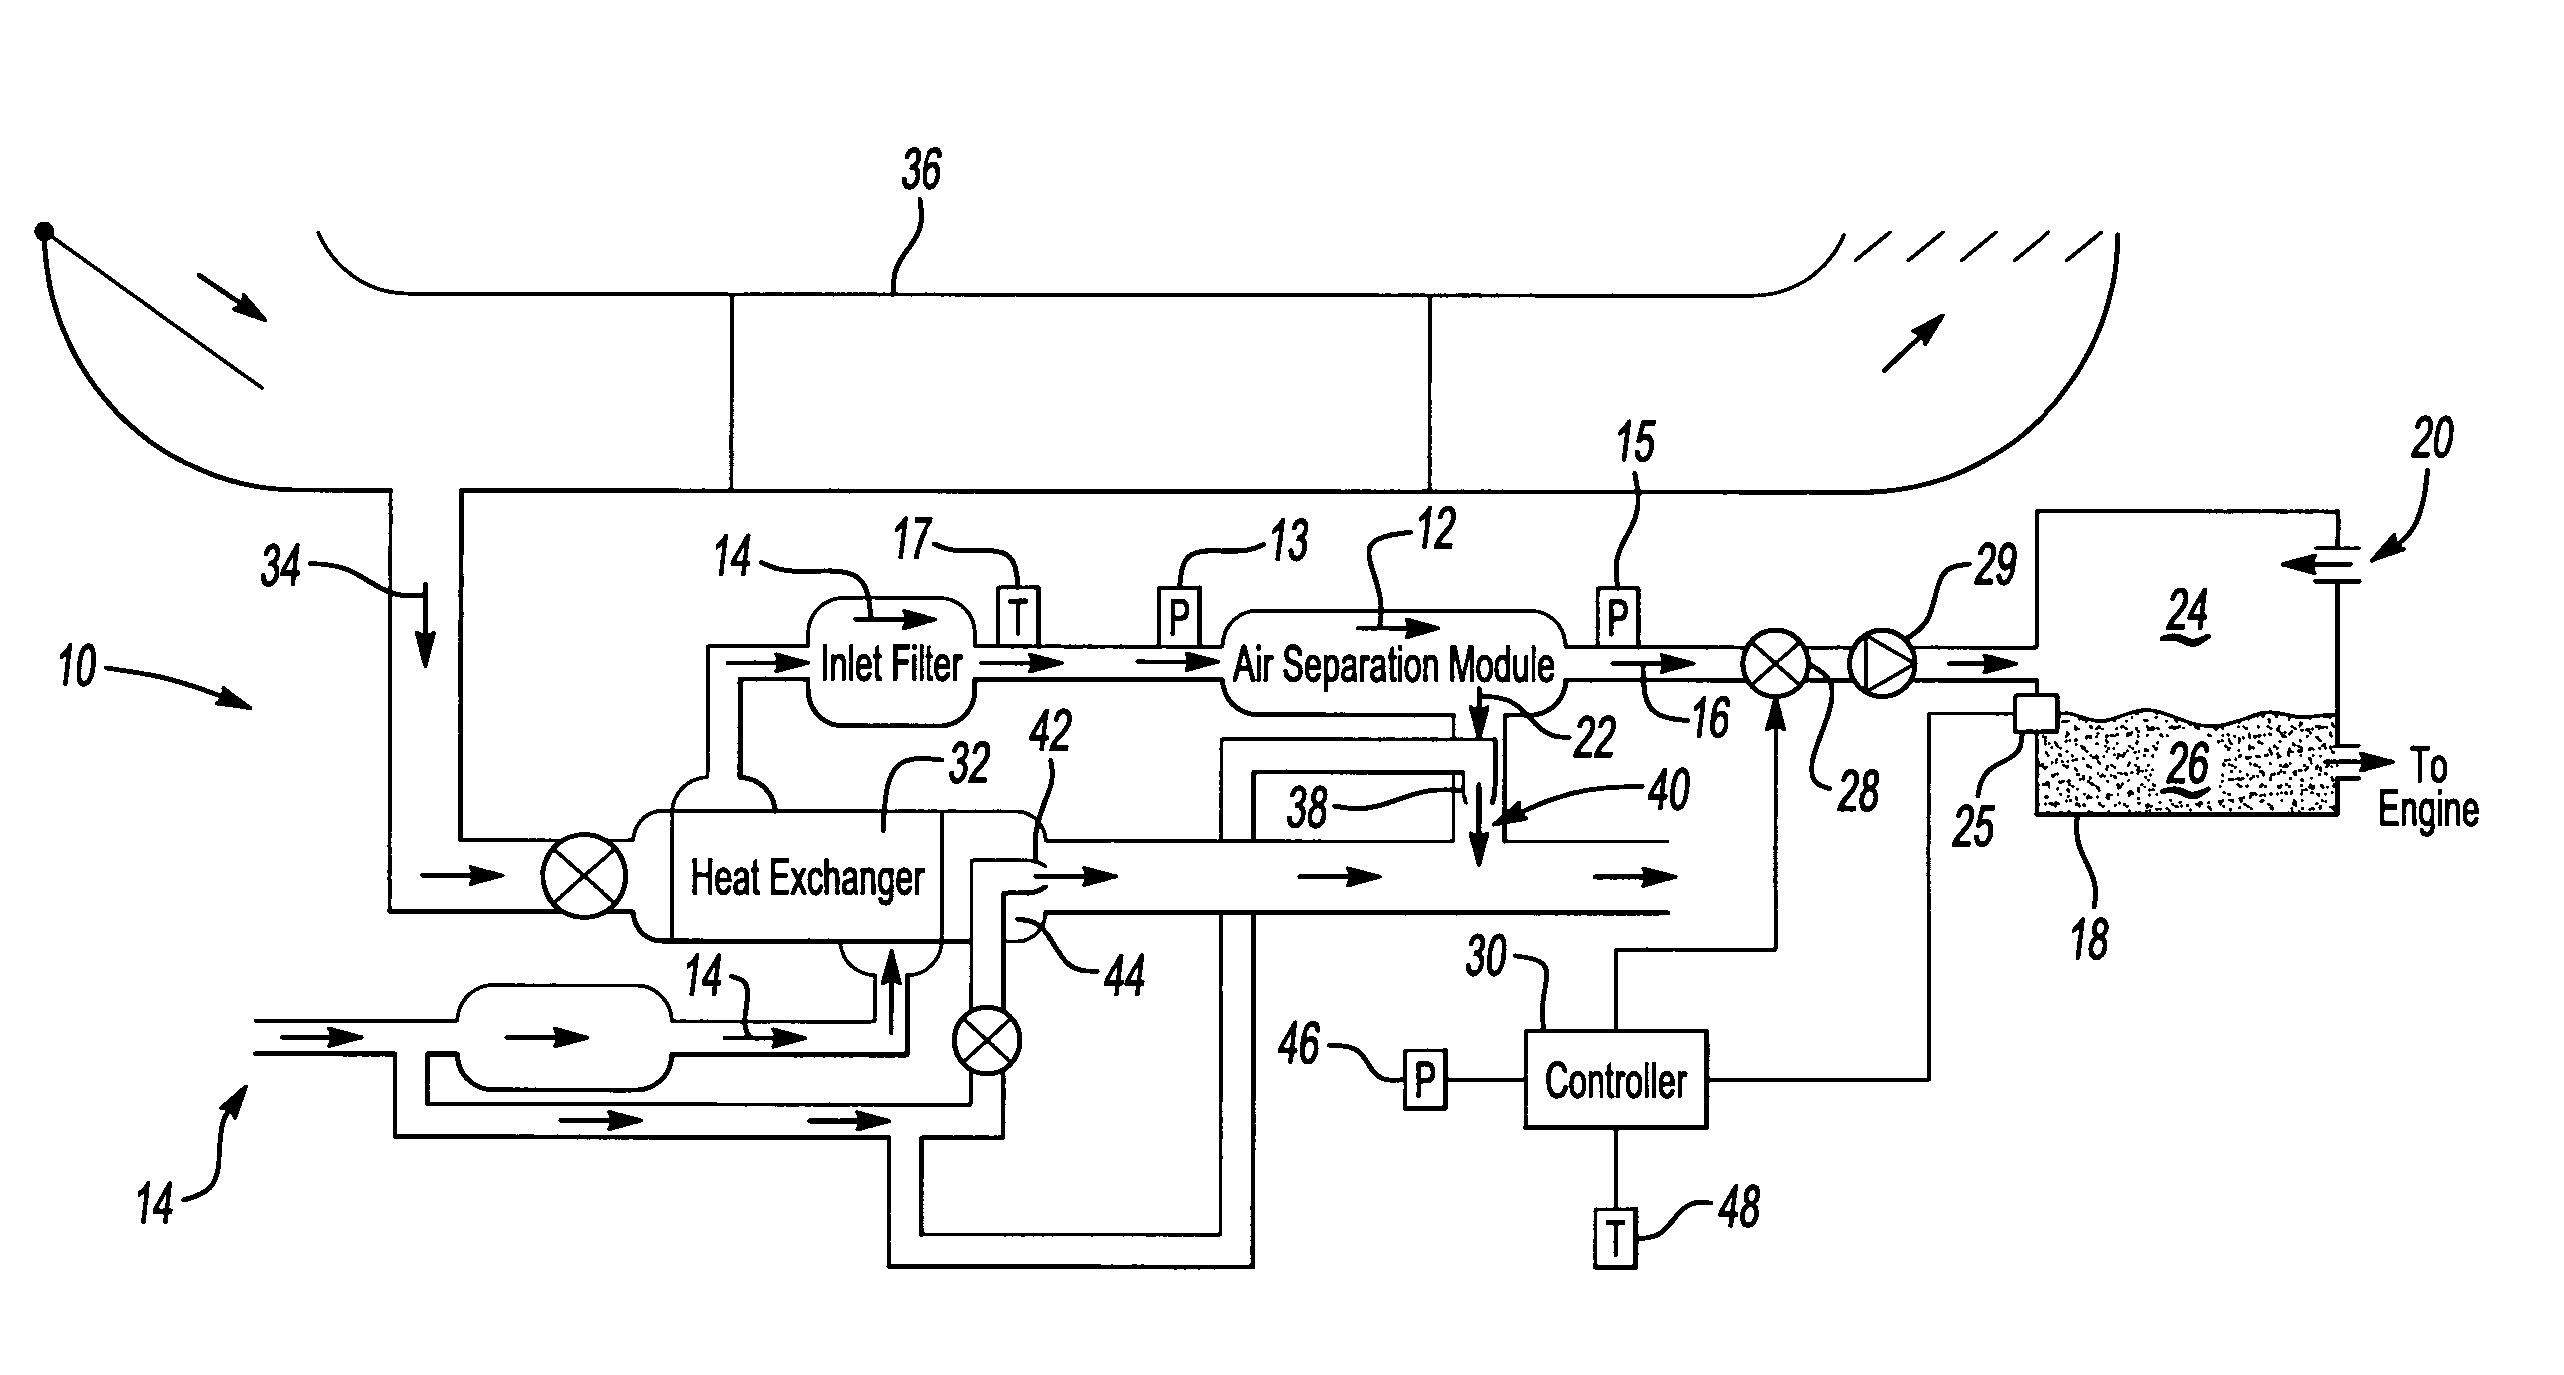 Flow control for on-board inert gas generation system